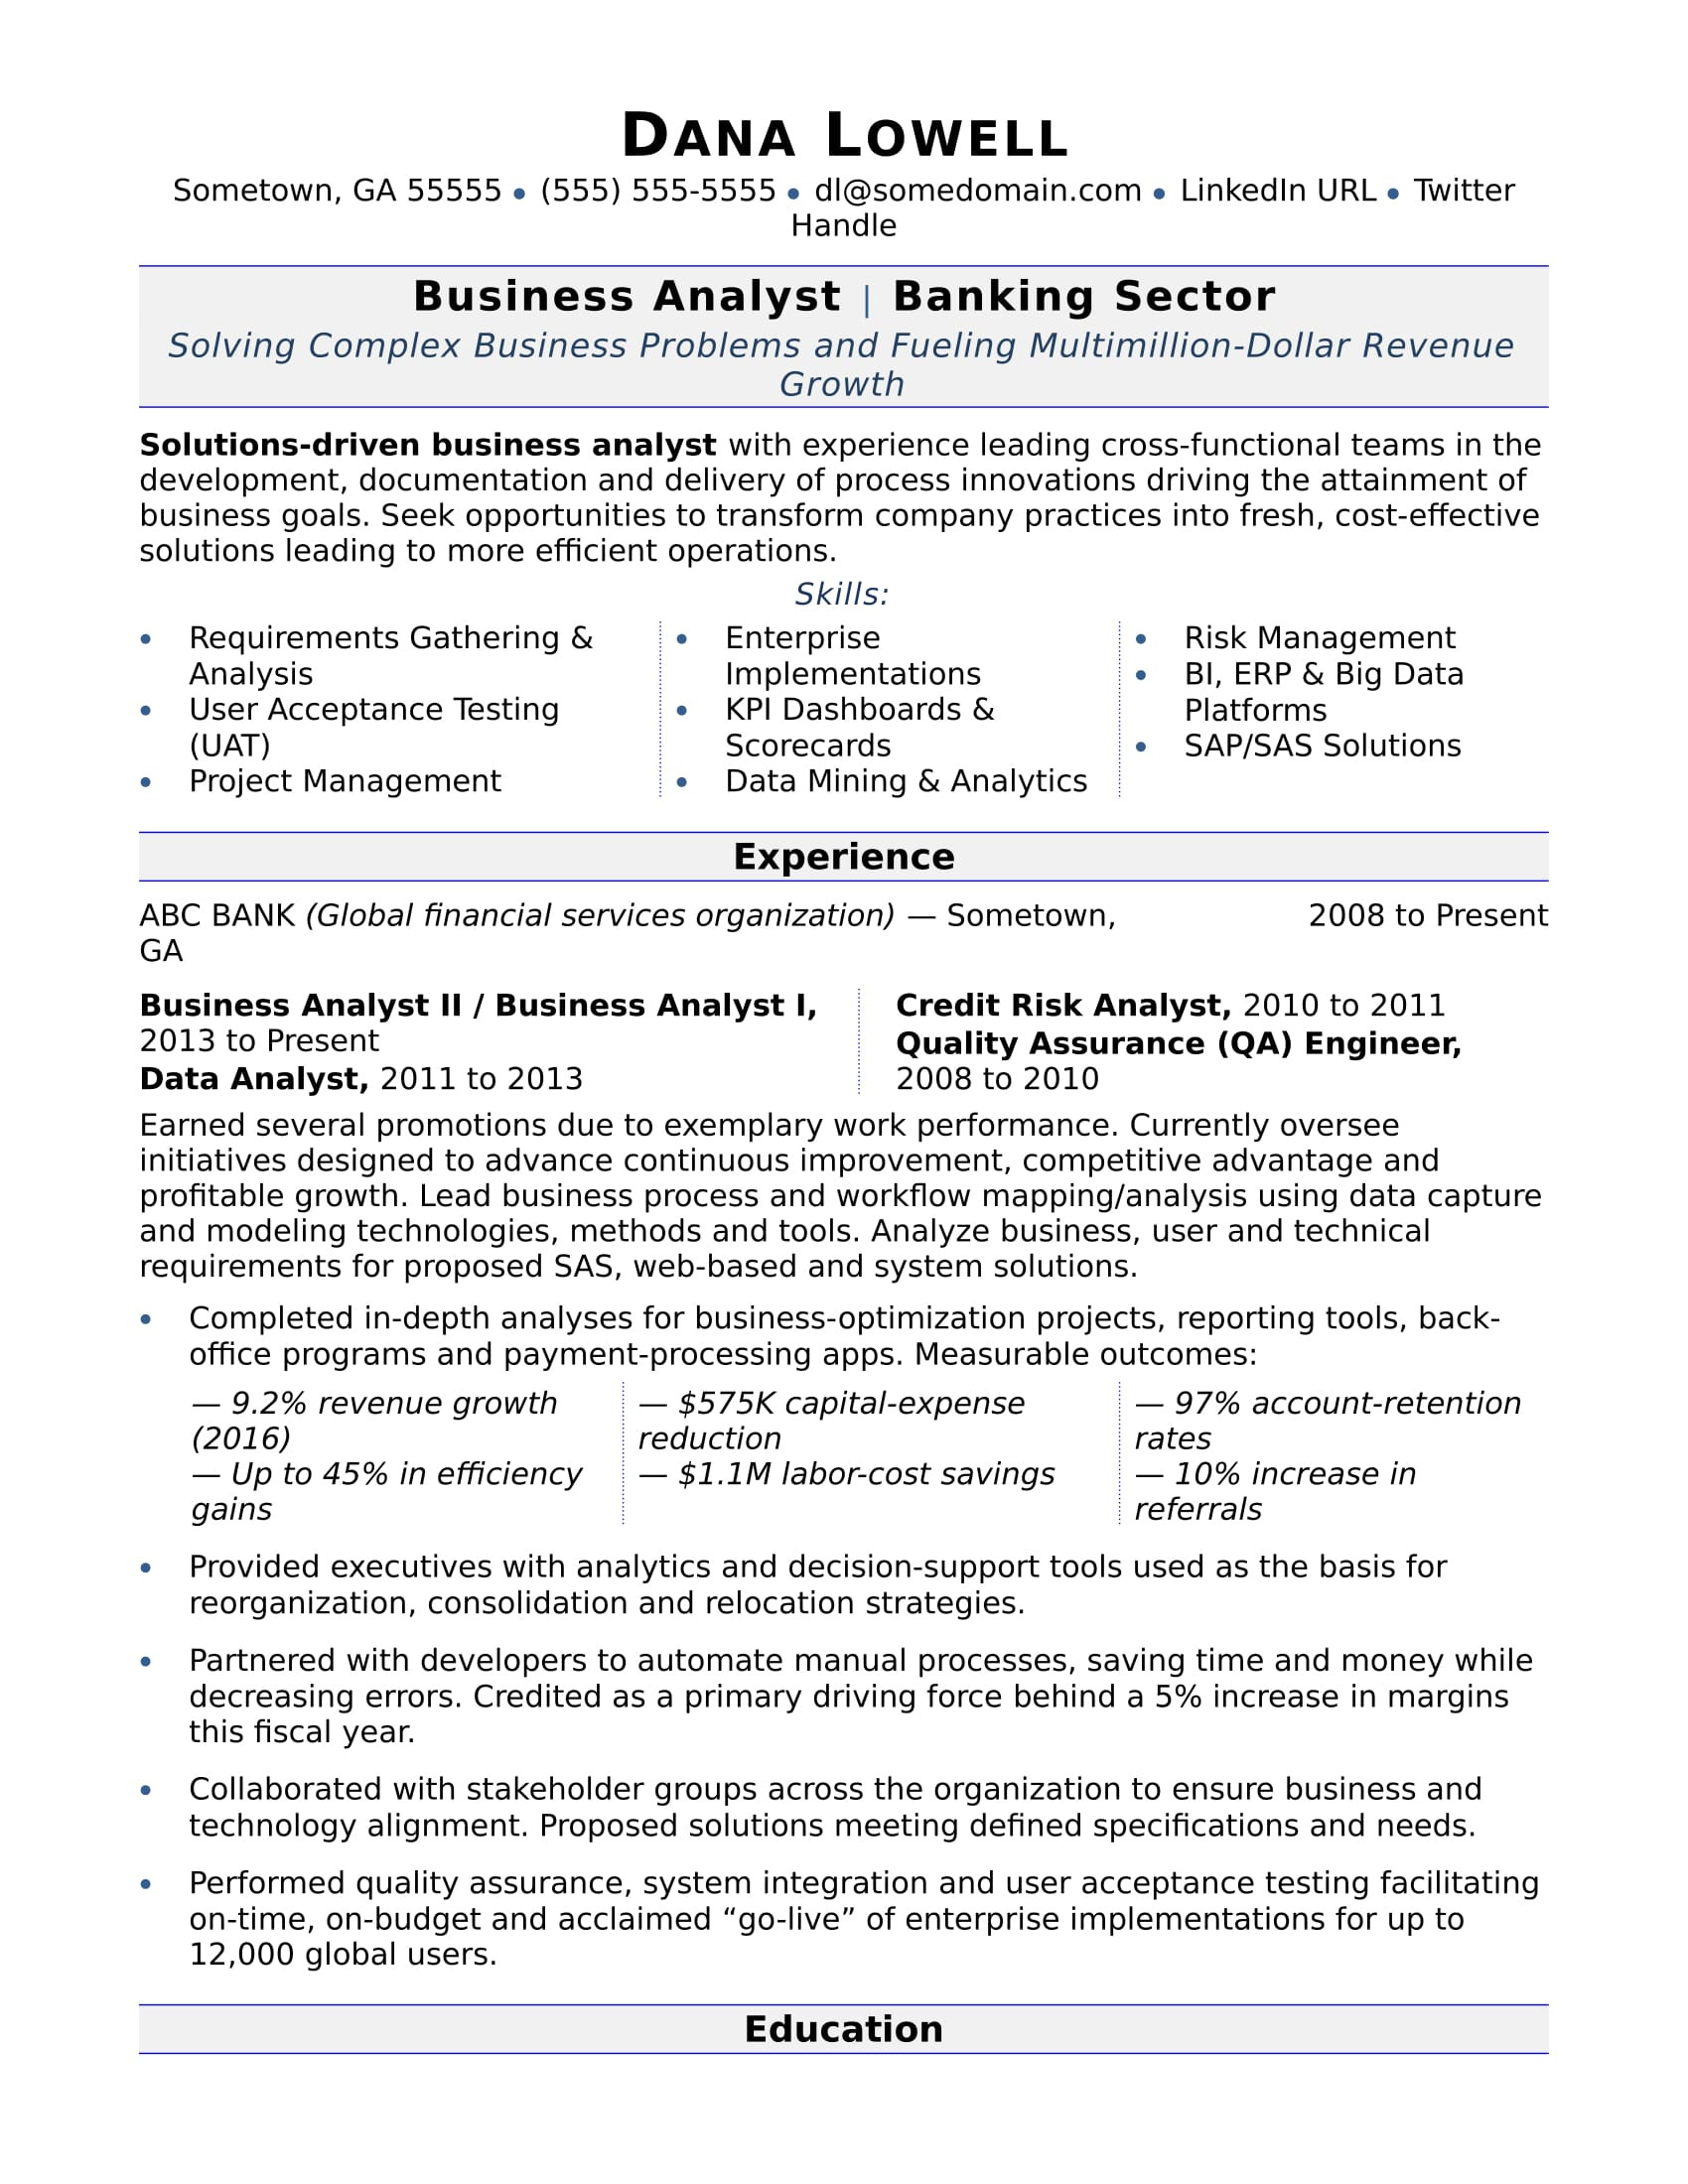 Sample Resume for Business Analyst with No Experience Business Analyst Resume Sample Monster.com